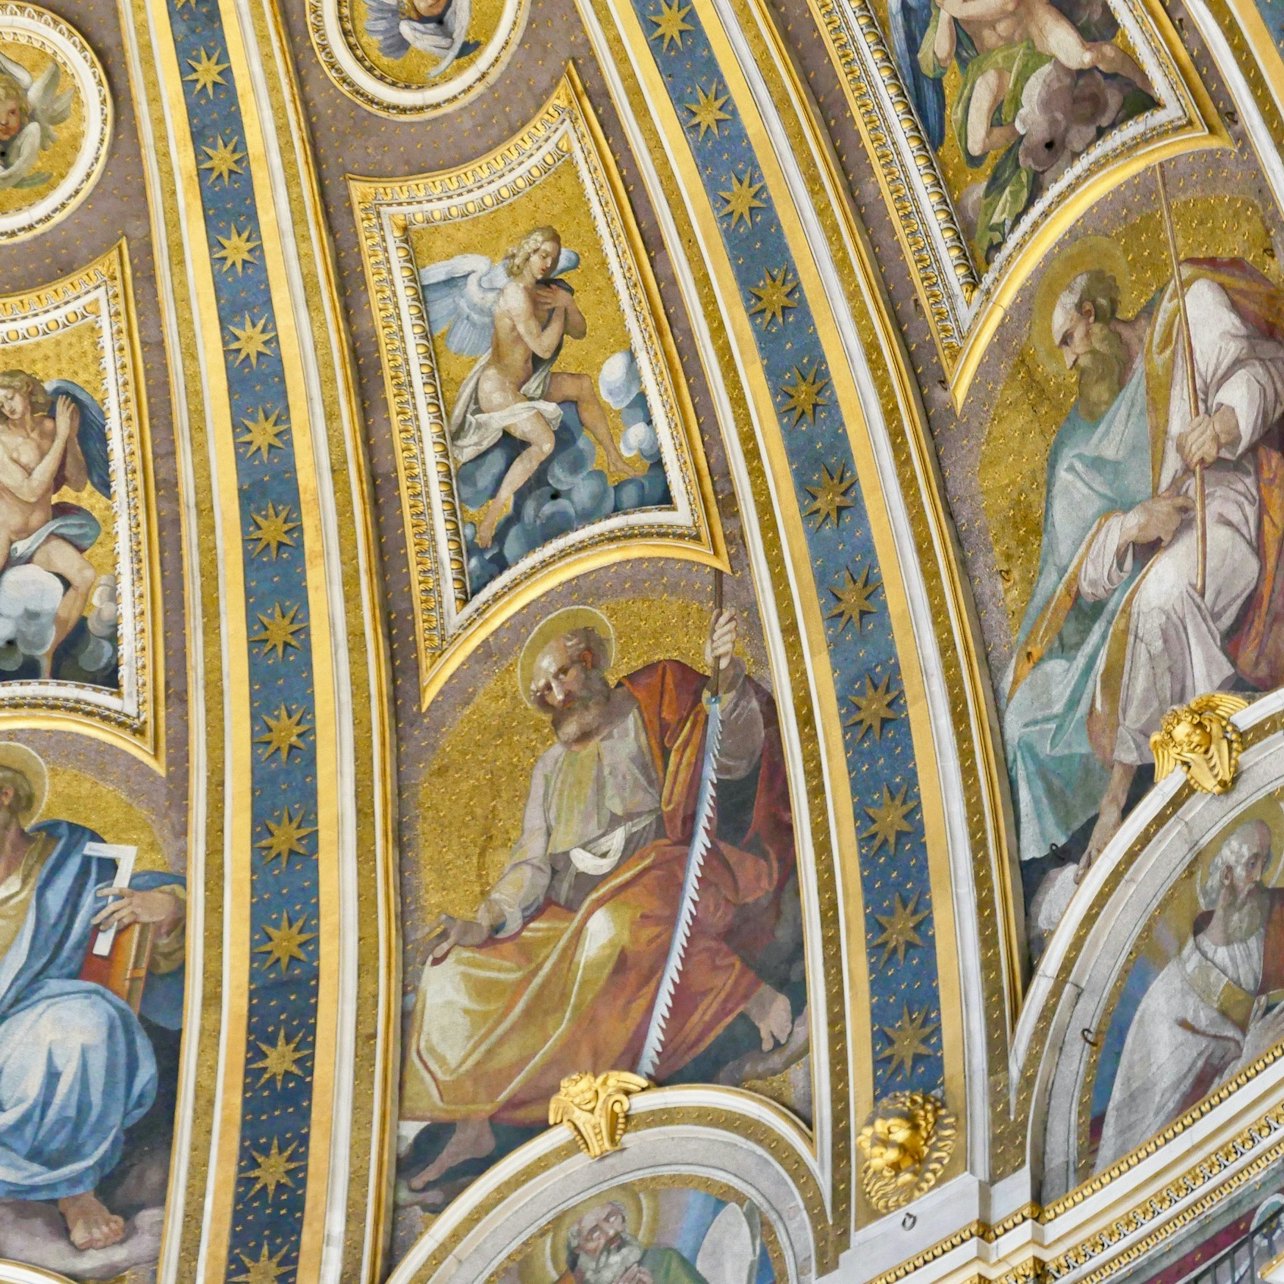 St Peter's Basilica & Dome: Guided Tour - Accommodations in Rome